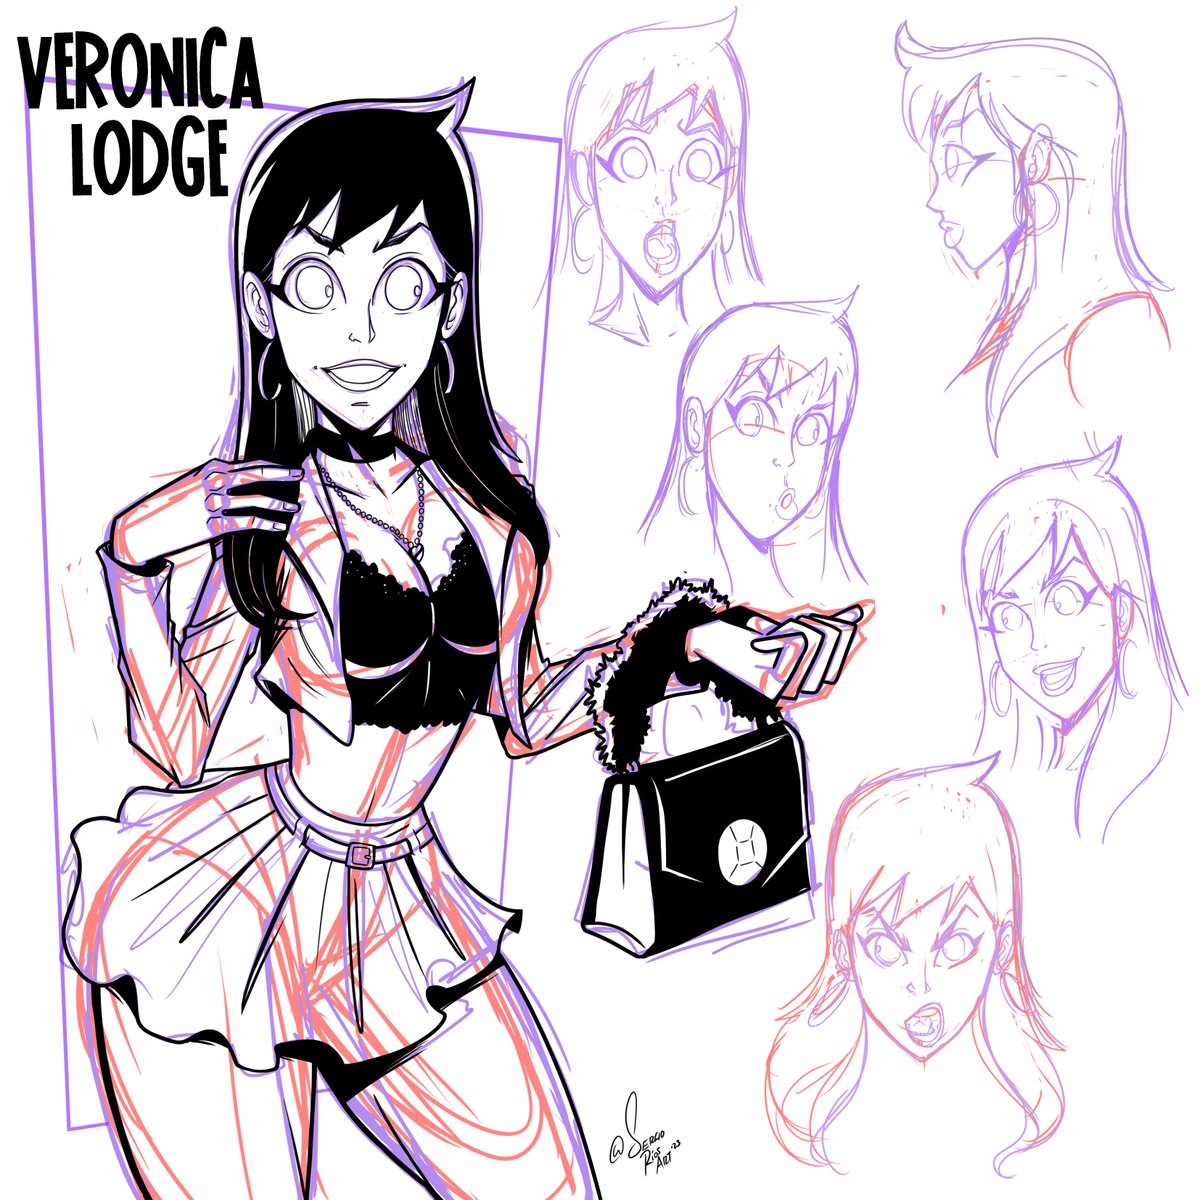 Veronica Lodge from @ArchieComics 
So fun to draw the Riverdale gang
#riverdale #veronicalodge #bettyandveronica #archiecomics #ARCHIE #jamieleerotante #comics #comicbooks #comicbookartist